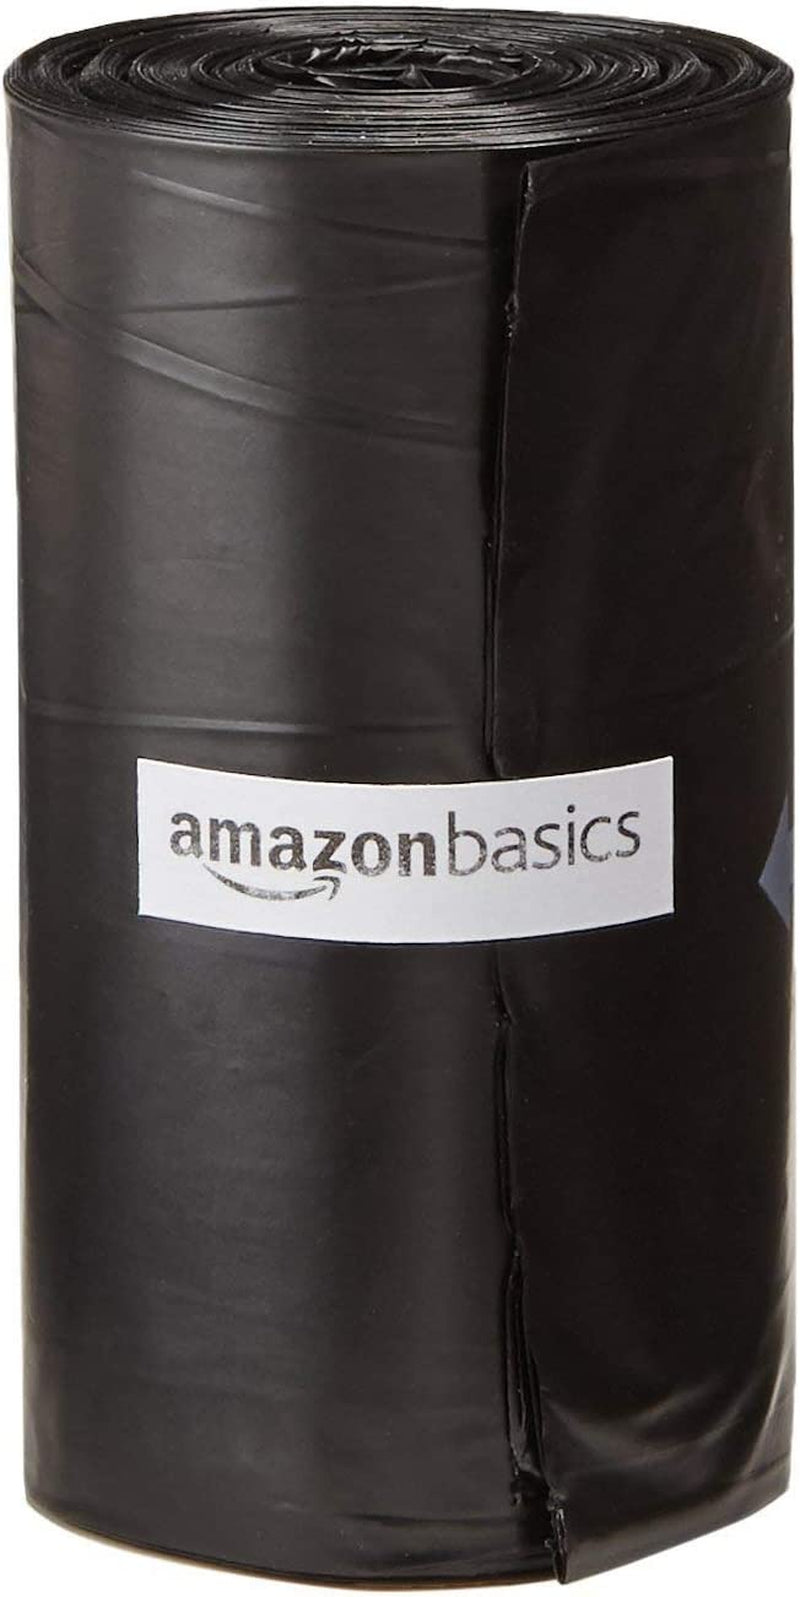 Standard Dog Poop Bags with Dispenser and Leash Clip, Unscented, 900 Count, 60 Pack of 15, Black, 13 Inch X 9 Inch